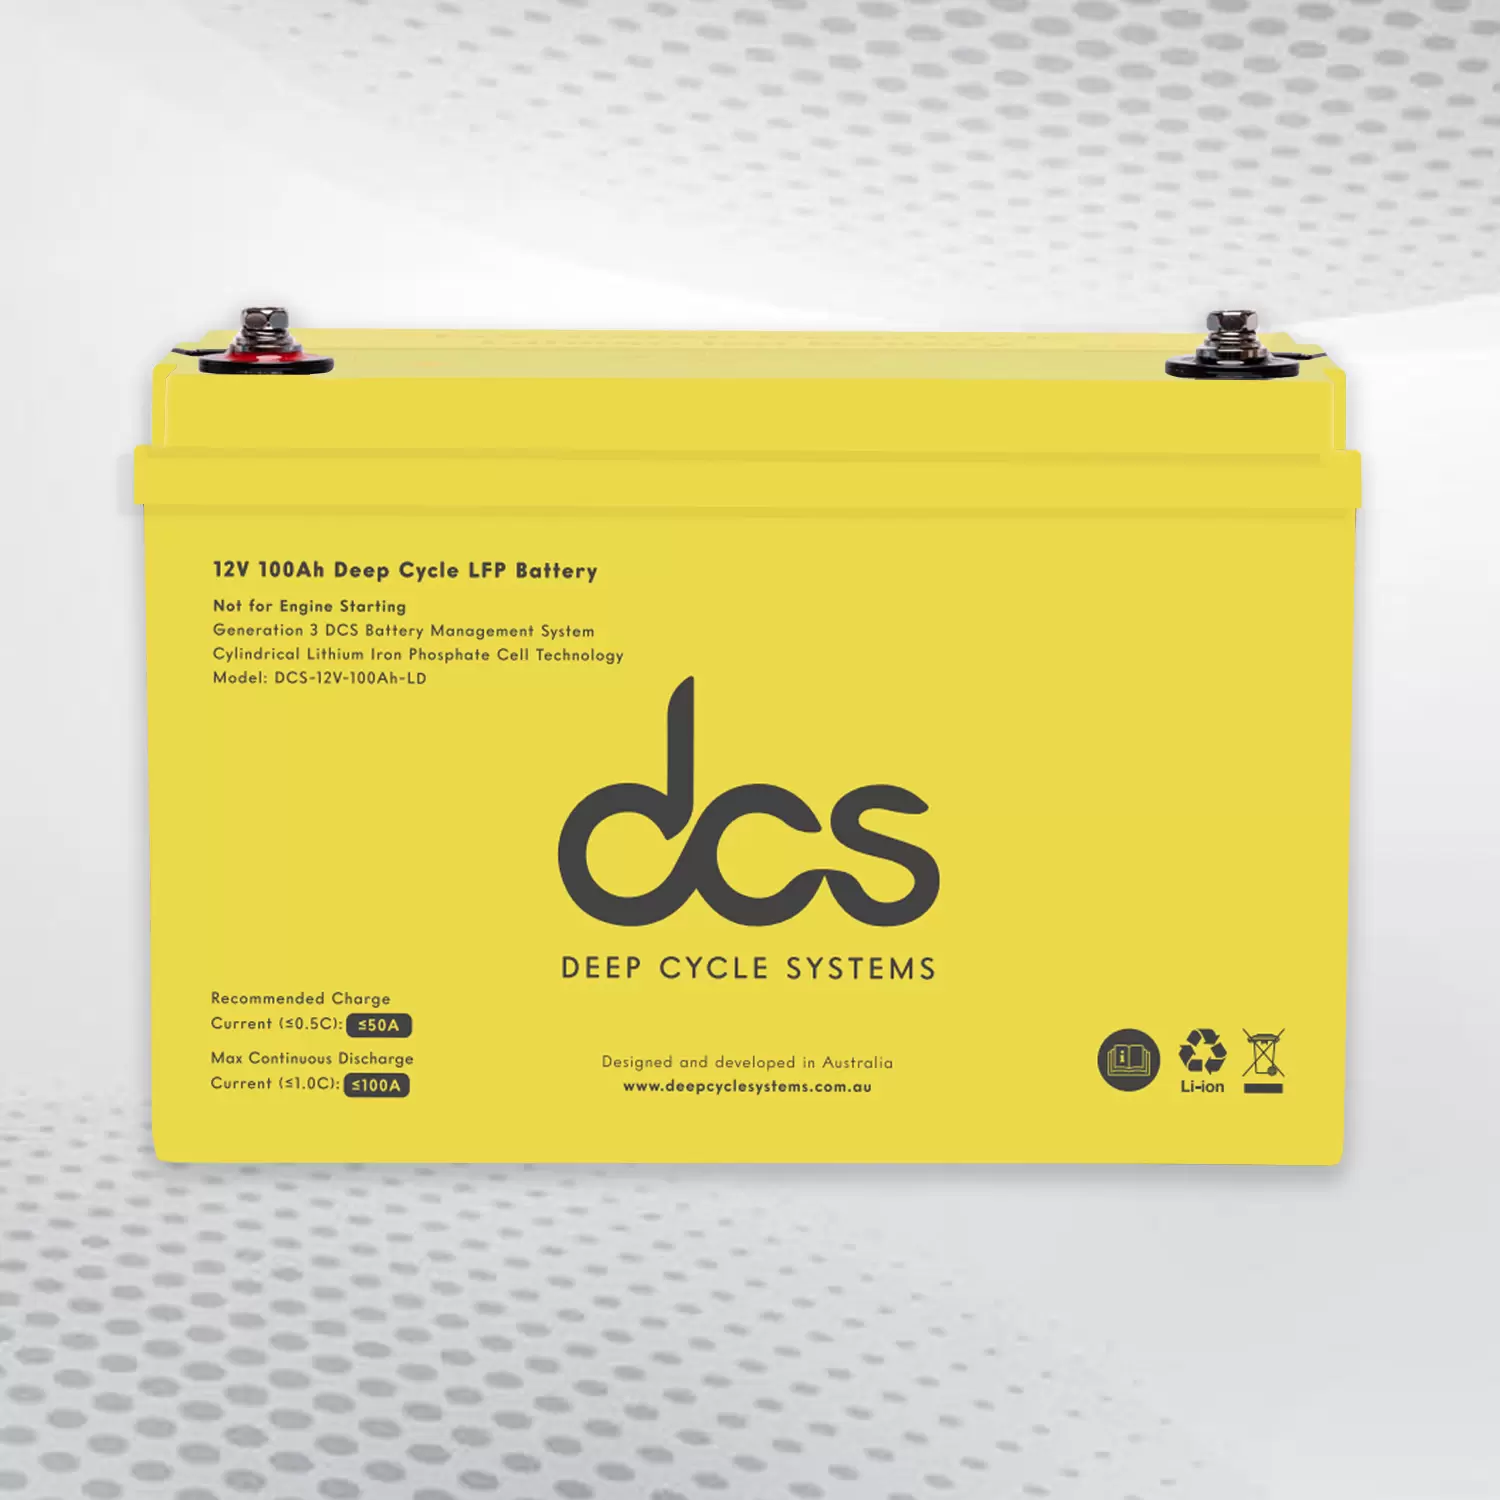 Understanding the Advancements in the New Deep Cycle Battery